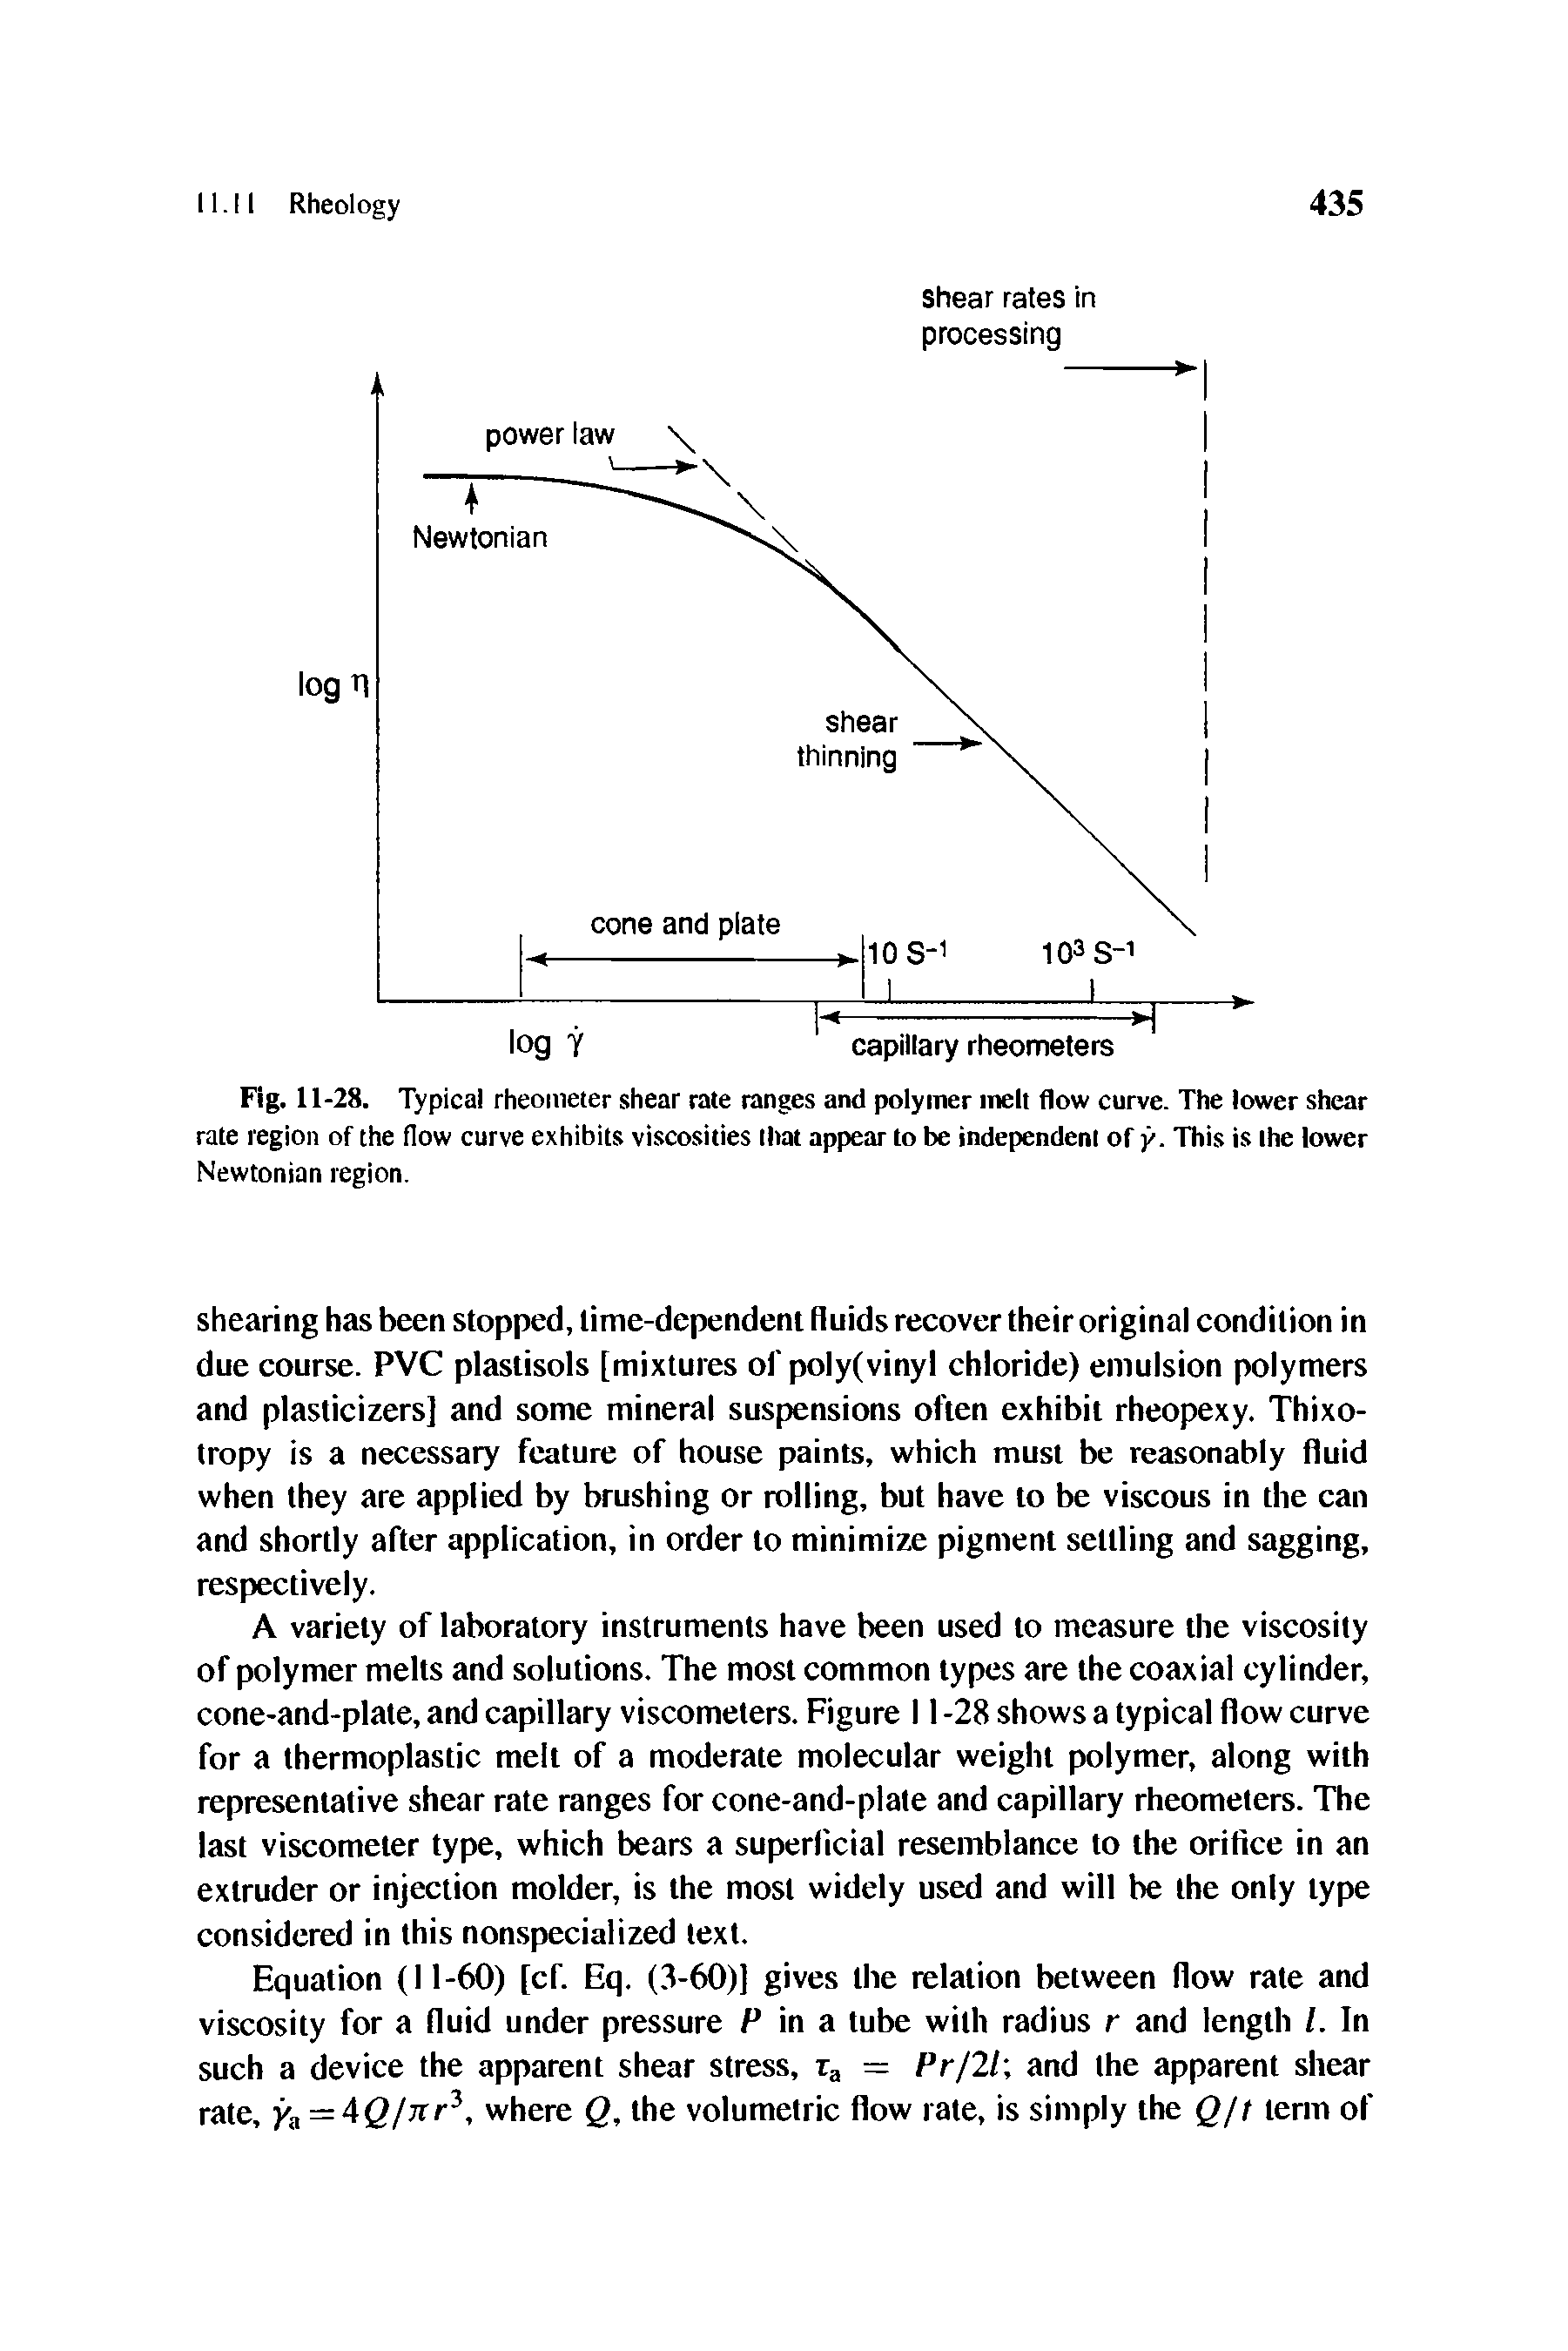 Fig. 11-28. Typical rheometer shear rate ranges and polymer melt flow curve. The lower shear rate region of the flow curve exhibits viscosities that appear to be independent of y. This is the lower Newtonian region.